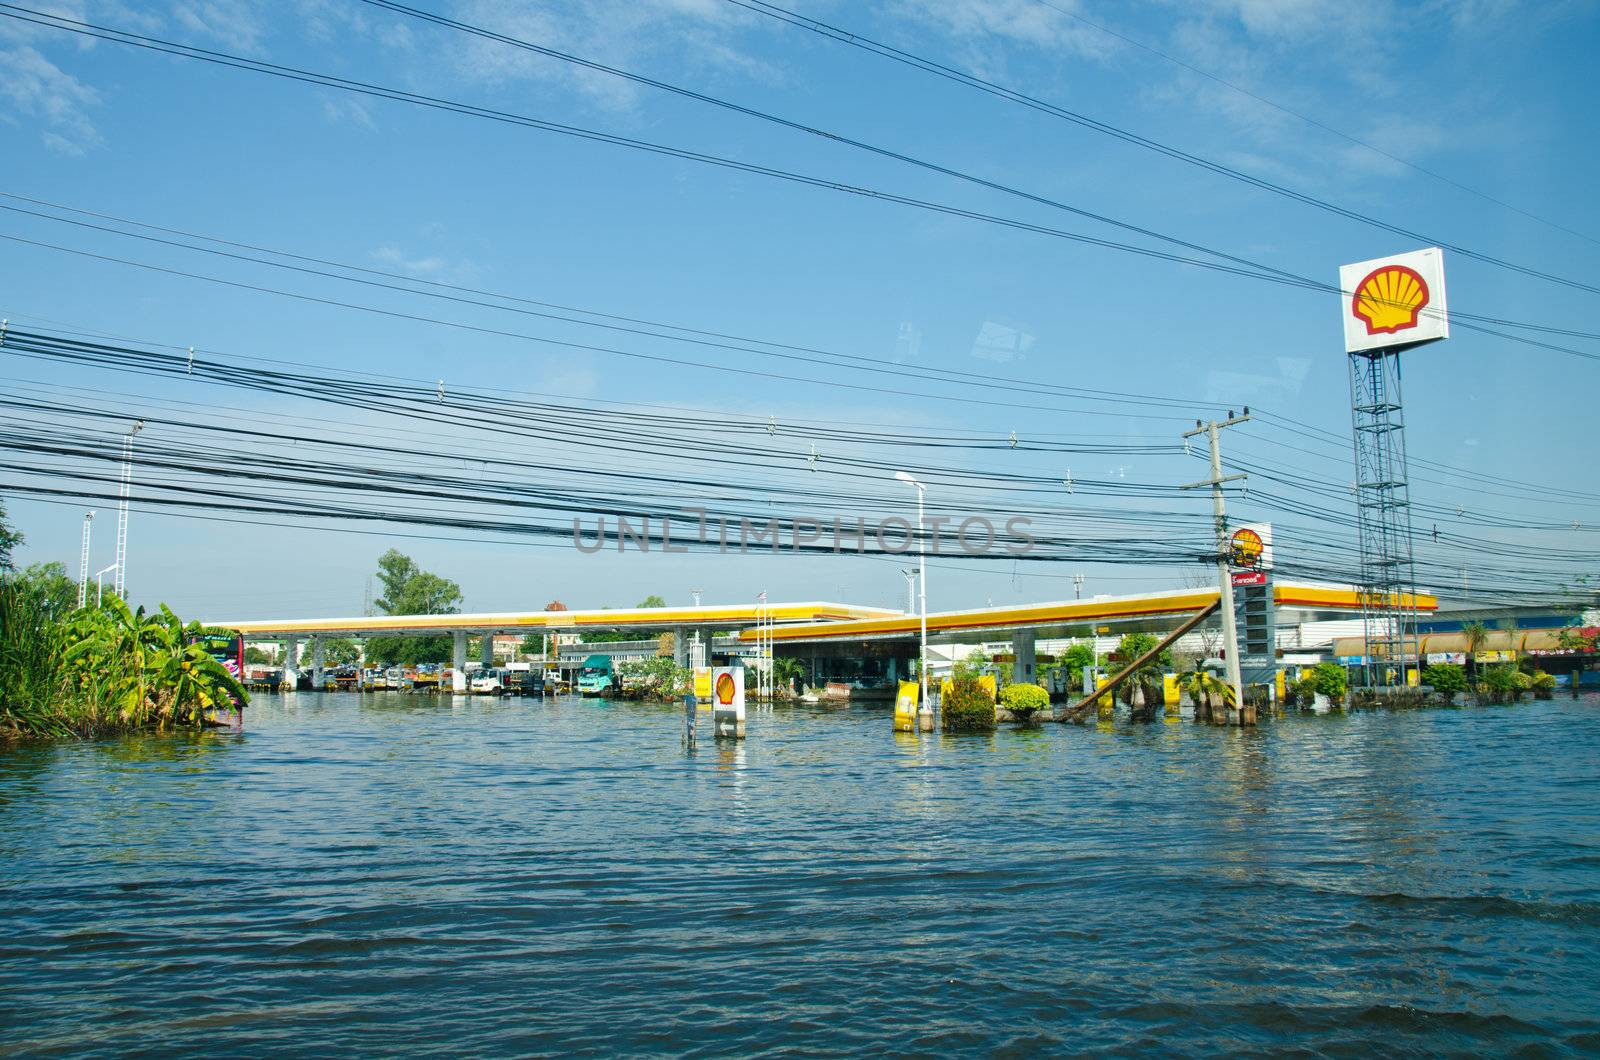 PATHUM THANI THAILAND – NOVEMBER 14: Gas station in Pathum Thani  during its worst flooding in decades is a major disaster on November 14, 2011  in Pathum Thani, Thailand.